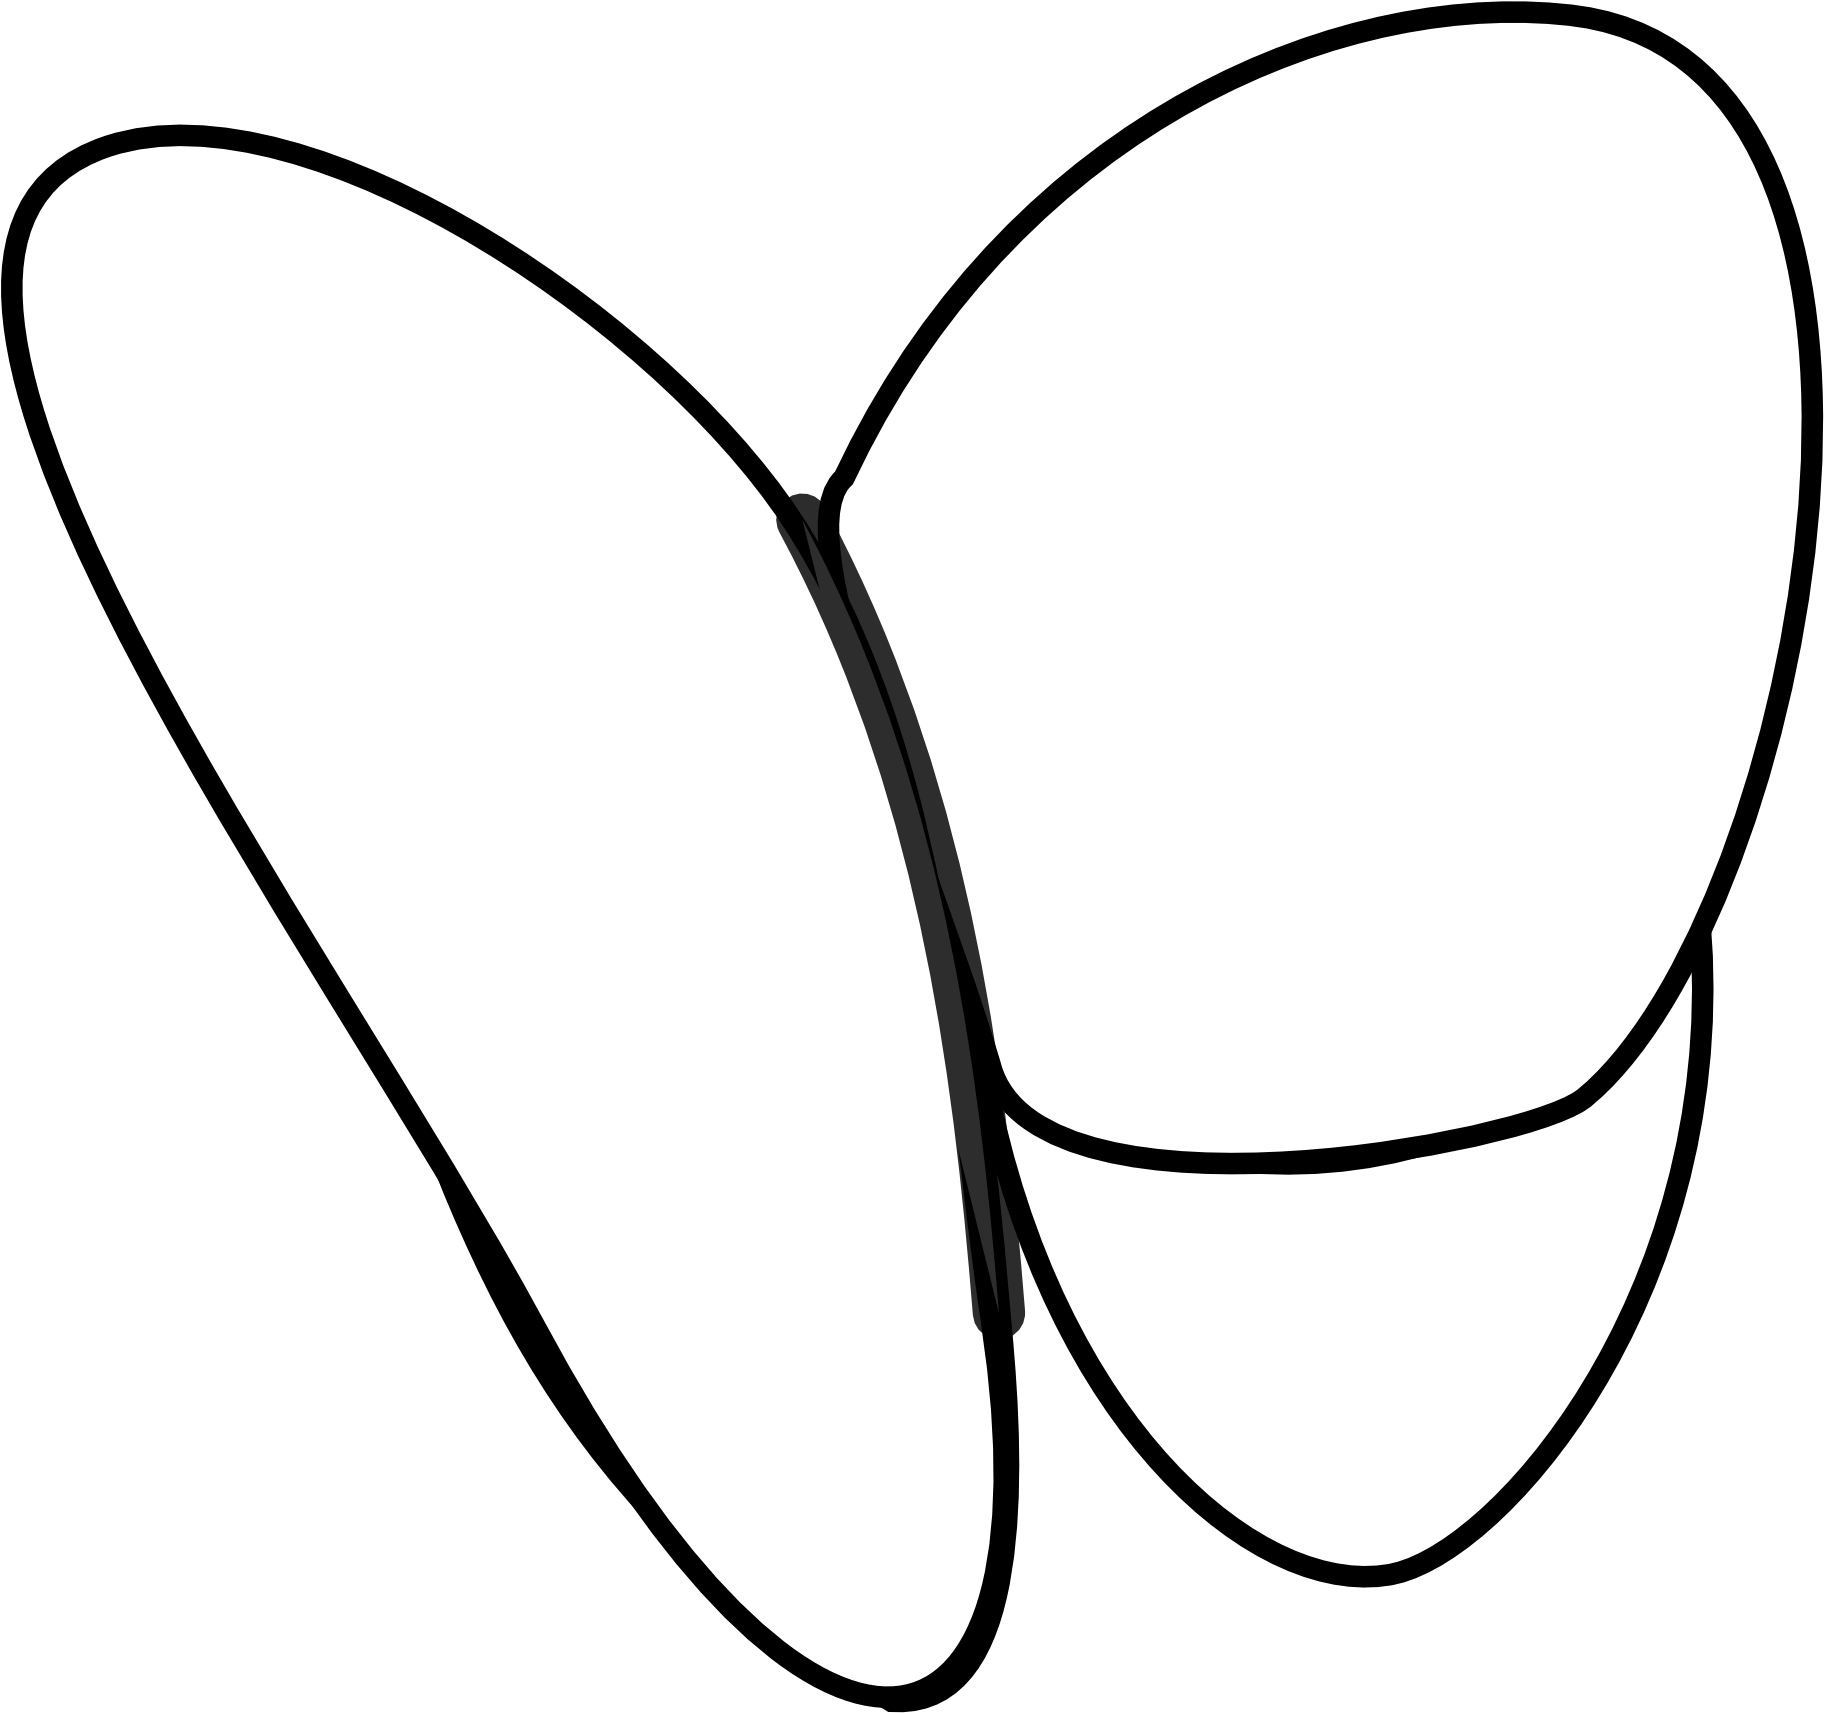 A White Butterfly With Black Outline